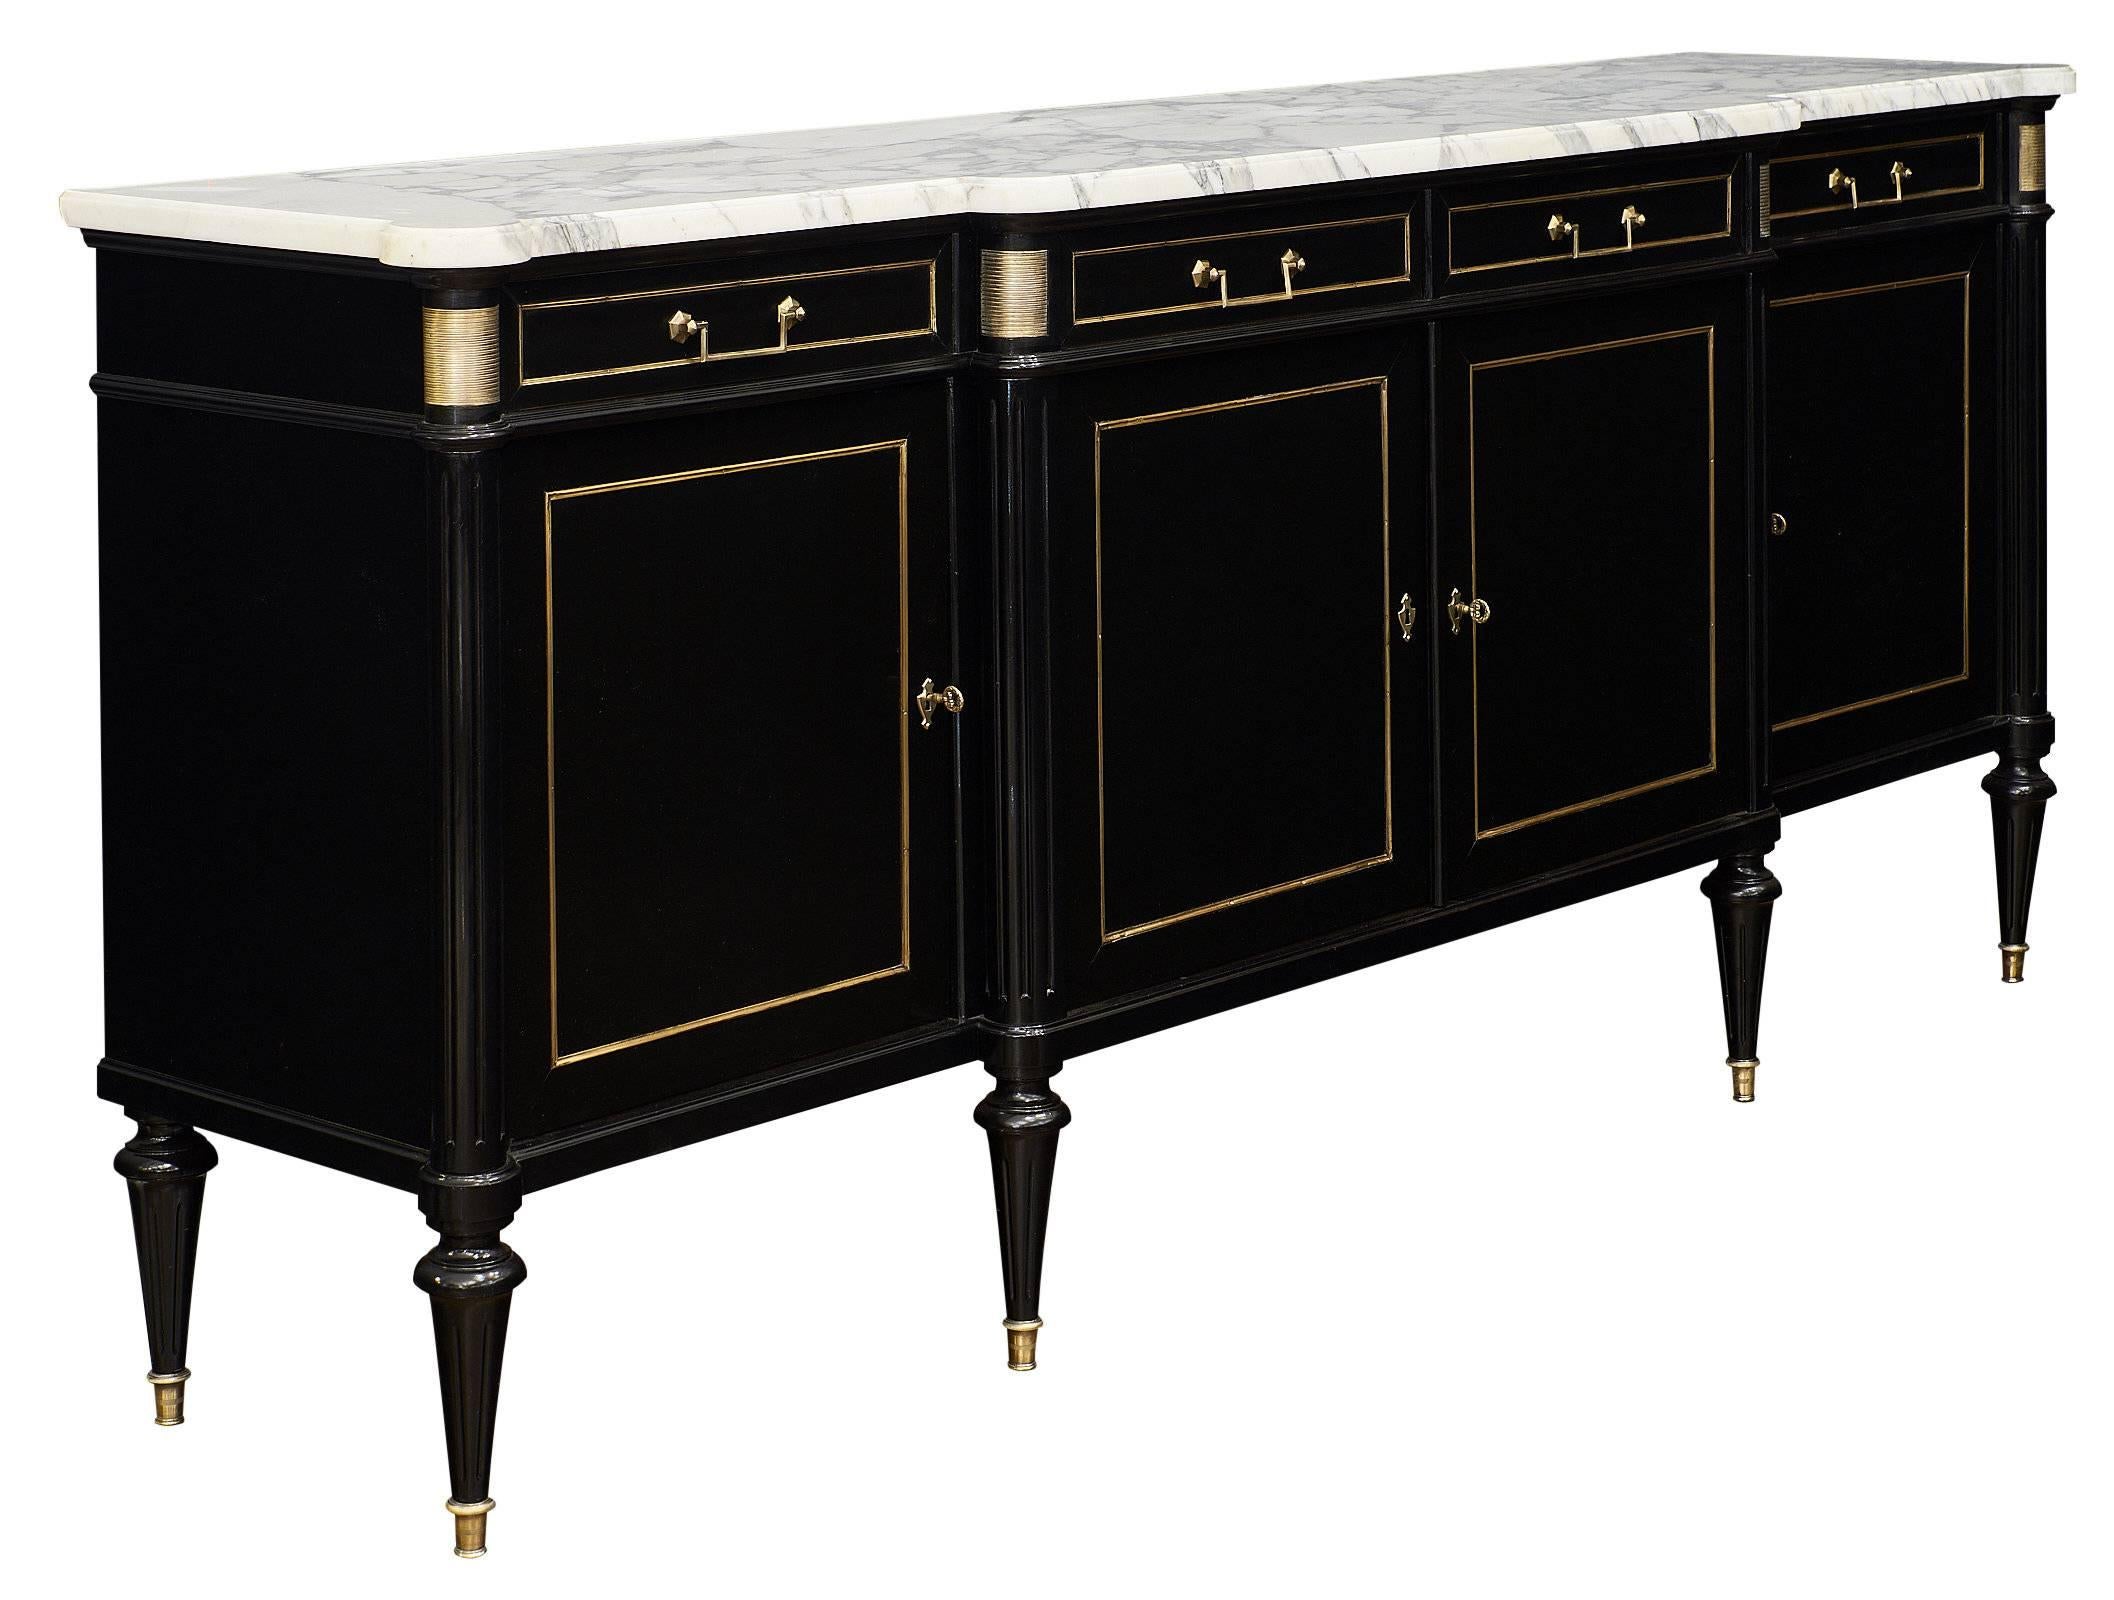 Fantastic Louis XVI style buffet with an impressive size and perfect lines. This piece is made of solid mahogany that has been ebonized and finished with a lustrous French polish. The buffet features an intact Carrara marble slab top. The hardware